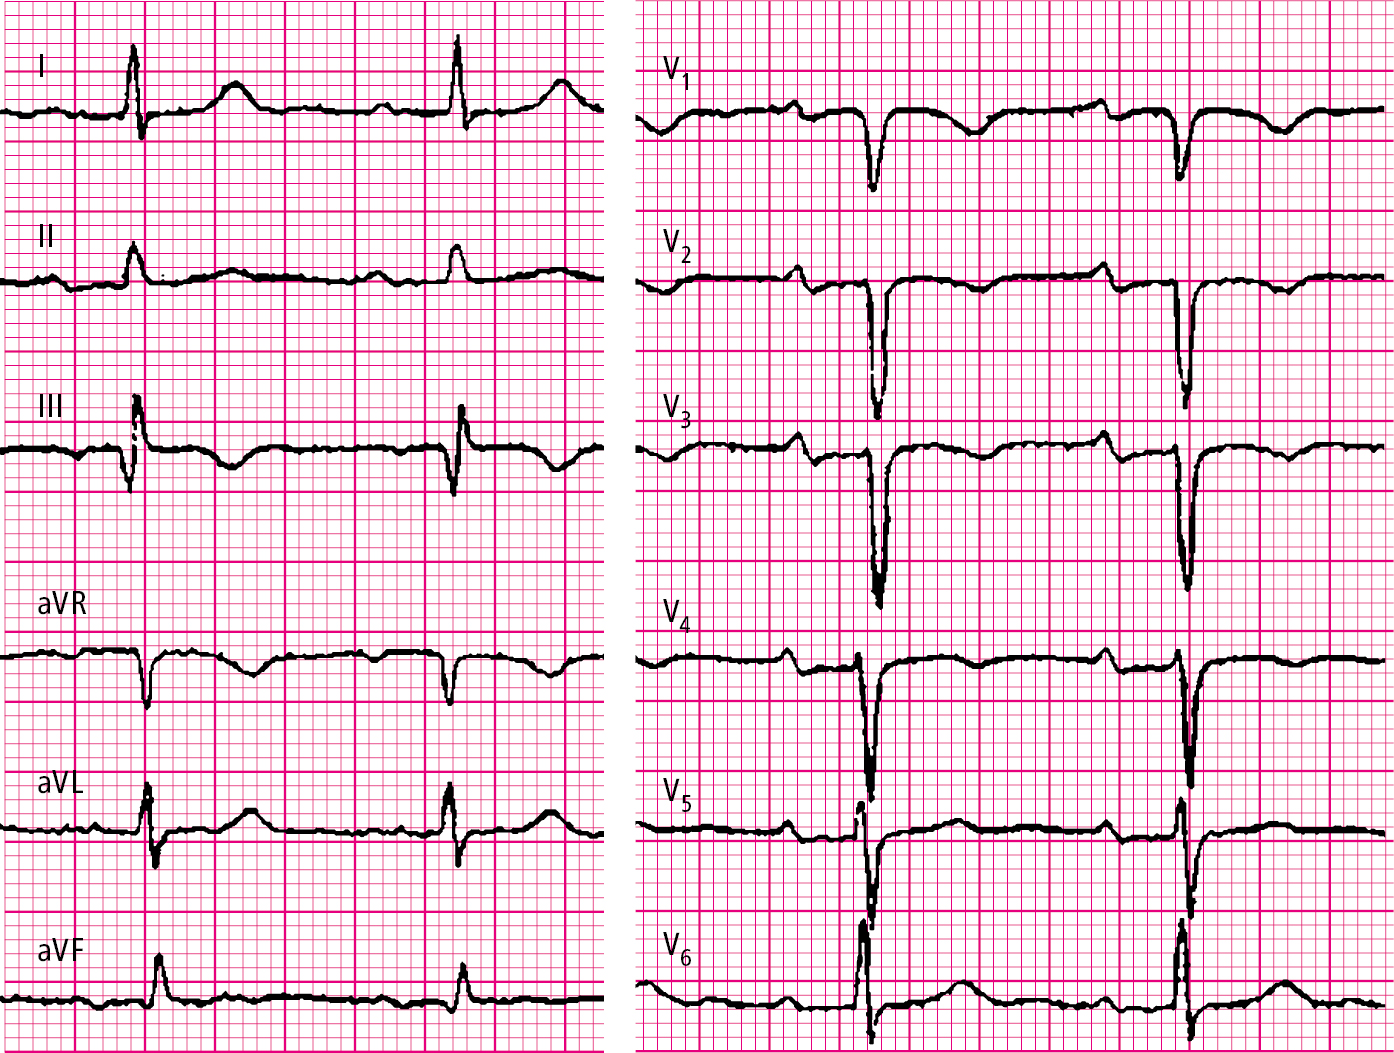 Figure 031_6200.  Electrocardiography (ECG) of a patient with intermediate-risk pulmonary embolism: SIQIII syndrome, inverted T waves in right precordial leads V  1   through V  4  ; PR interval prolonged to 220 ms. 